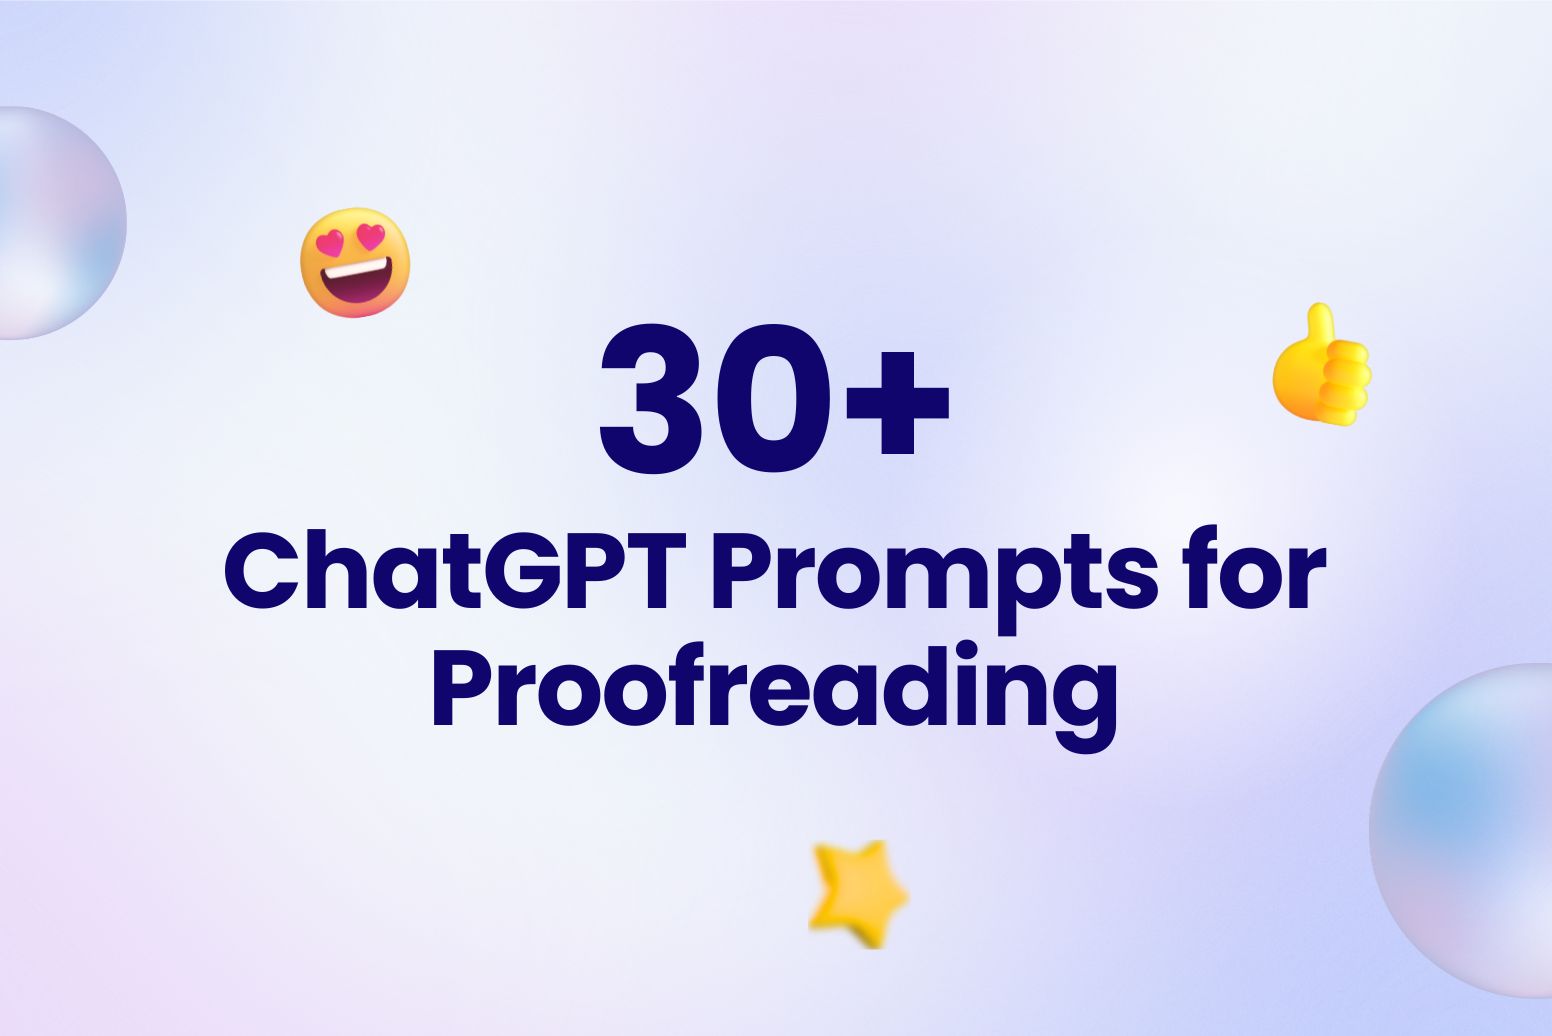 30+ ChatGPT Prompts for Proofreading